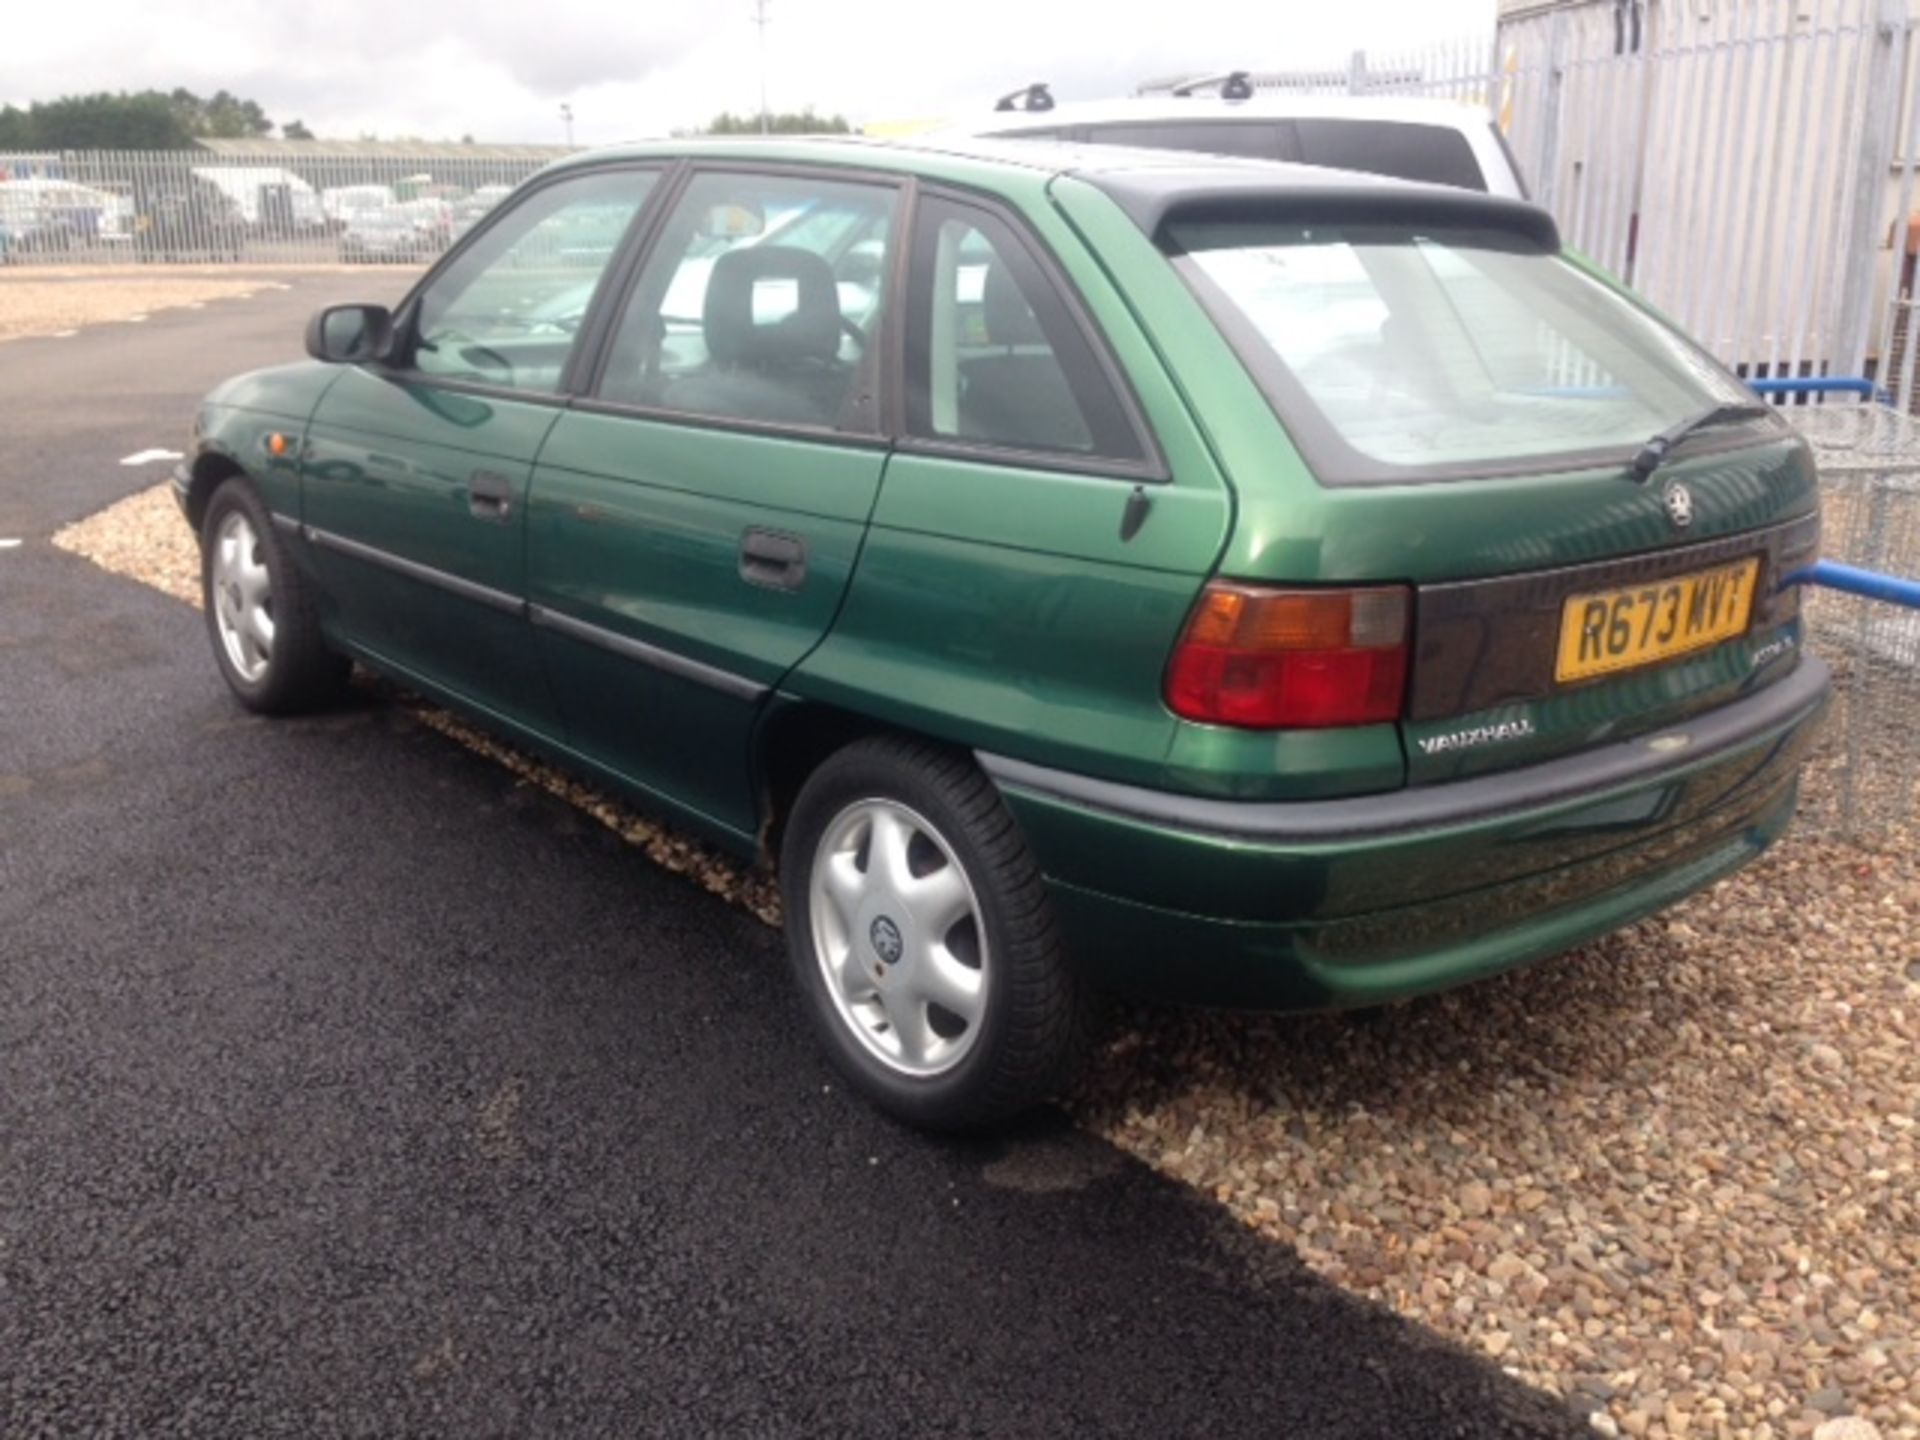 VAUXHALL, ASTRA LS - 1598cc, Chassis number W0L0TFF68W8058251 - presented in Rio Verde Green - Image 2 of 3